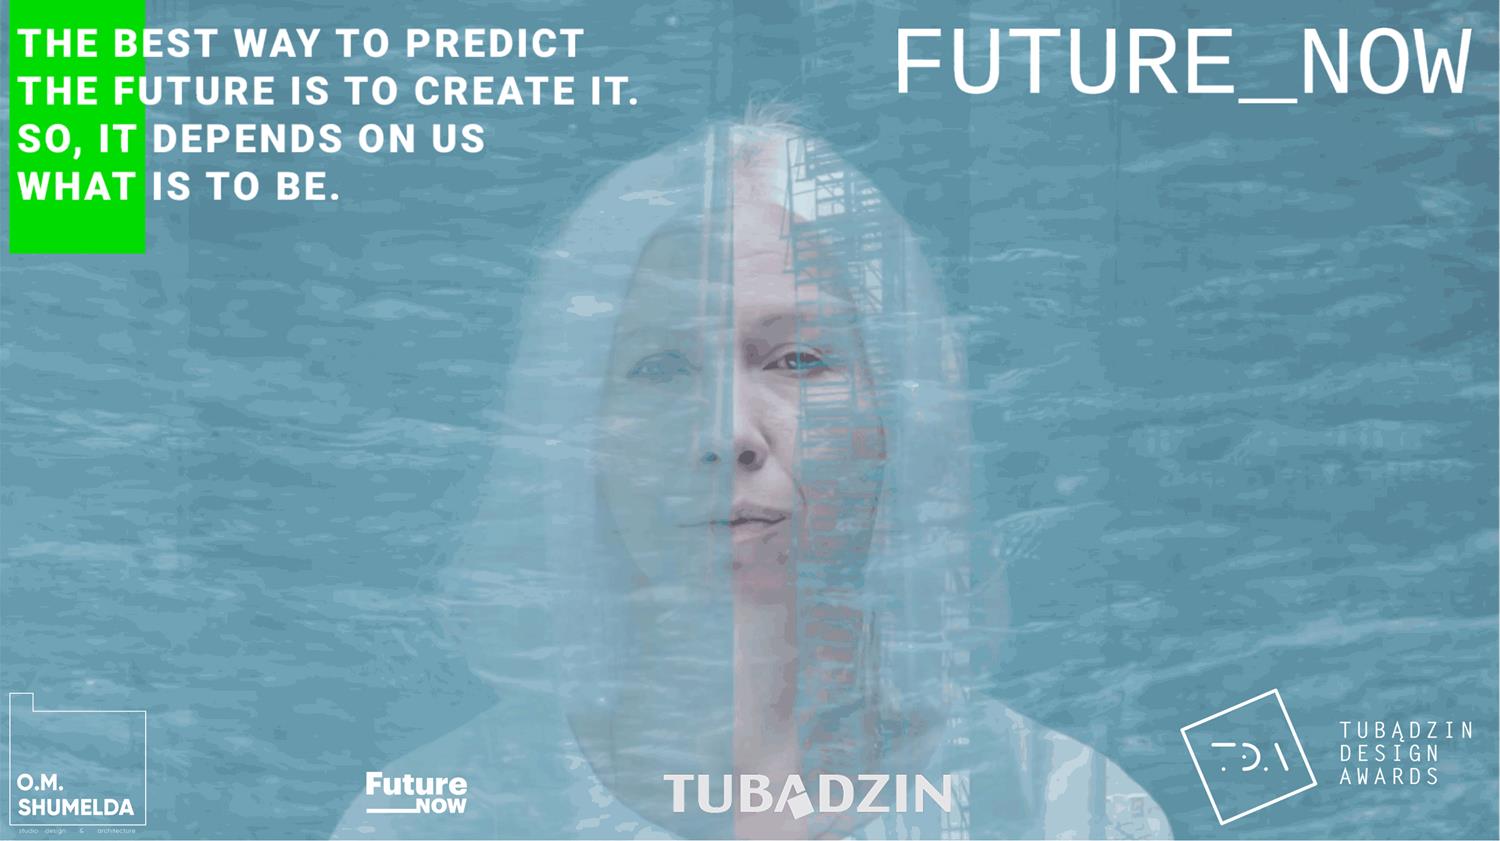 Second stage of FutureNow!